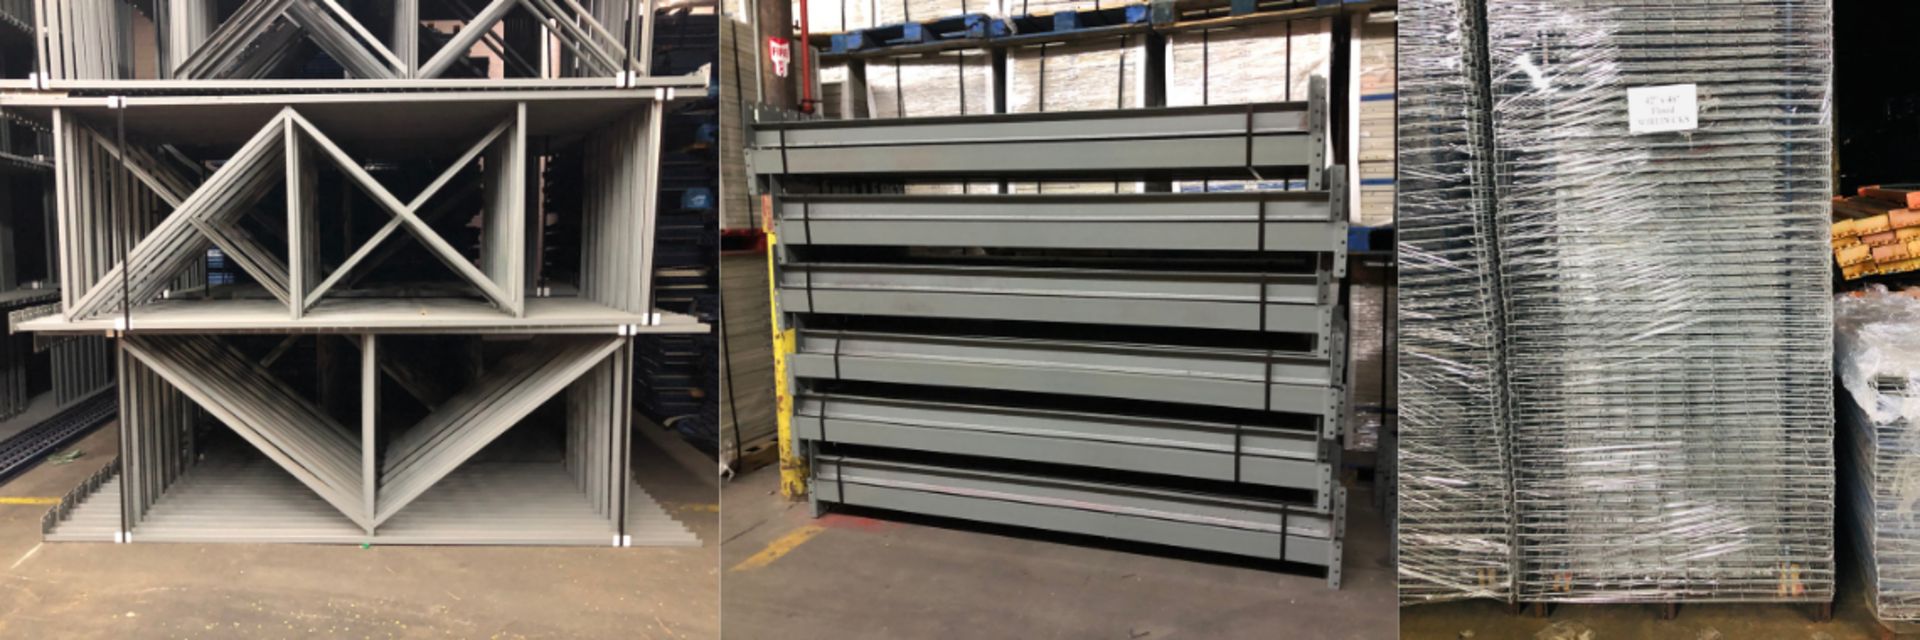 9 BAYS OF 10.5'H X 42"D X 93"L STRUCTURAL STYLE PALLET RACKS - Image 2 of 6